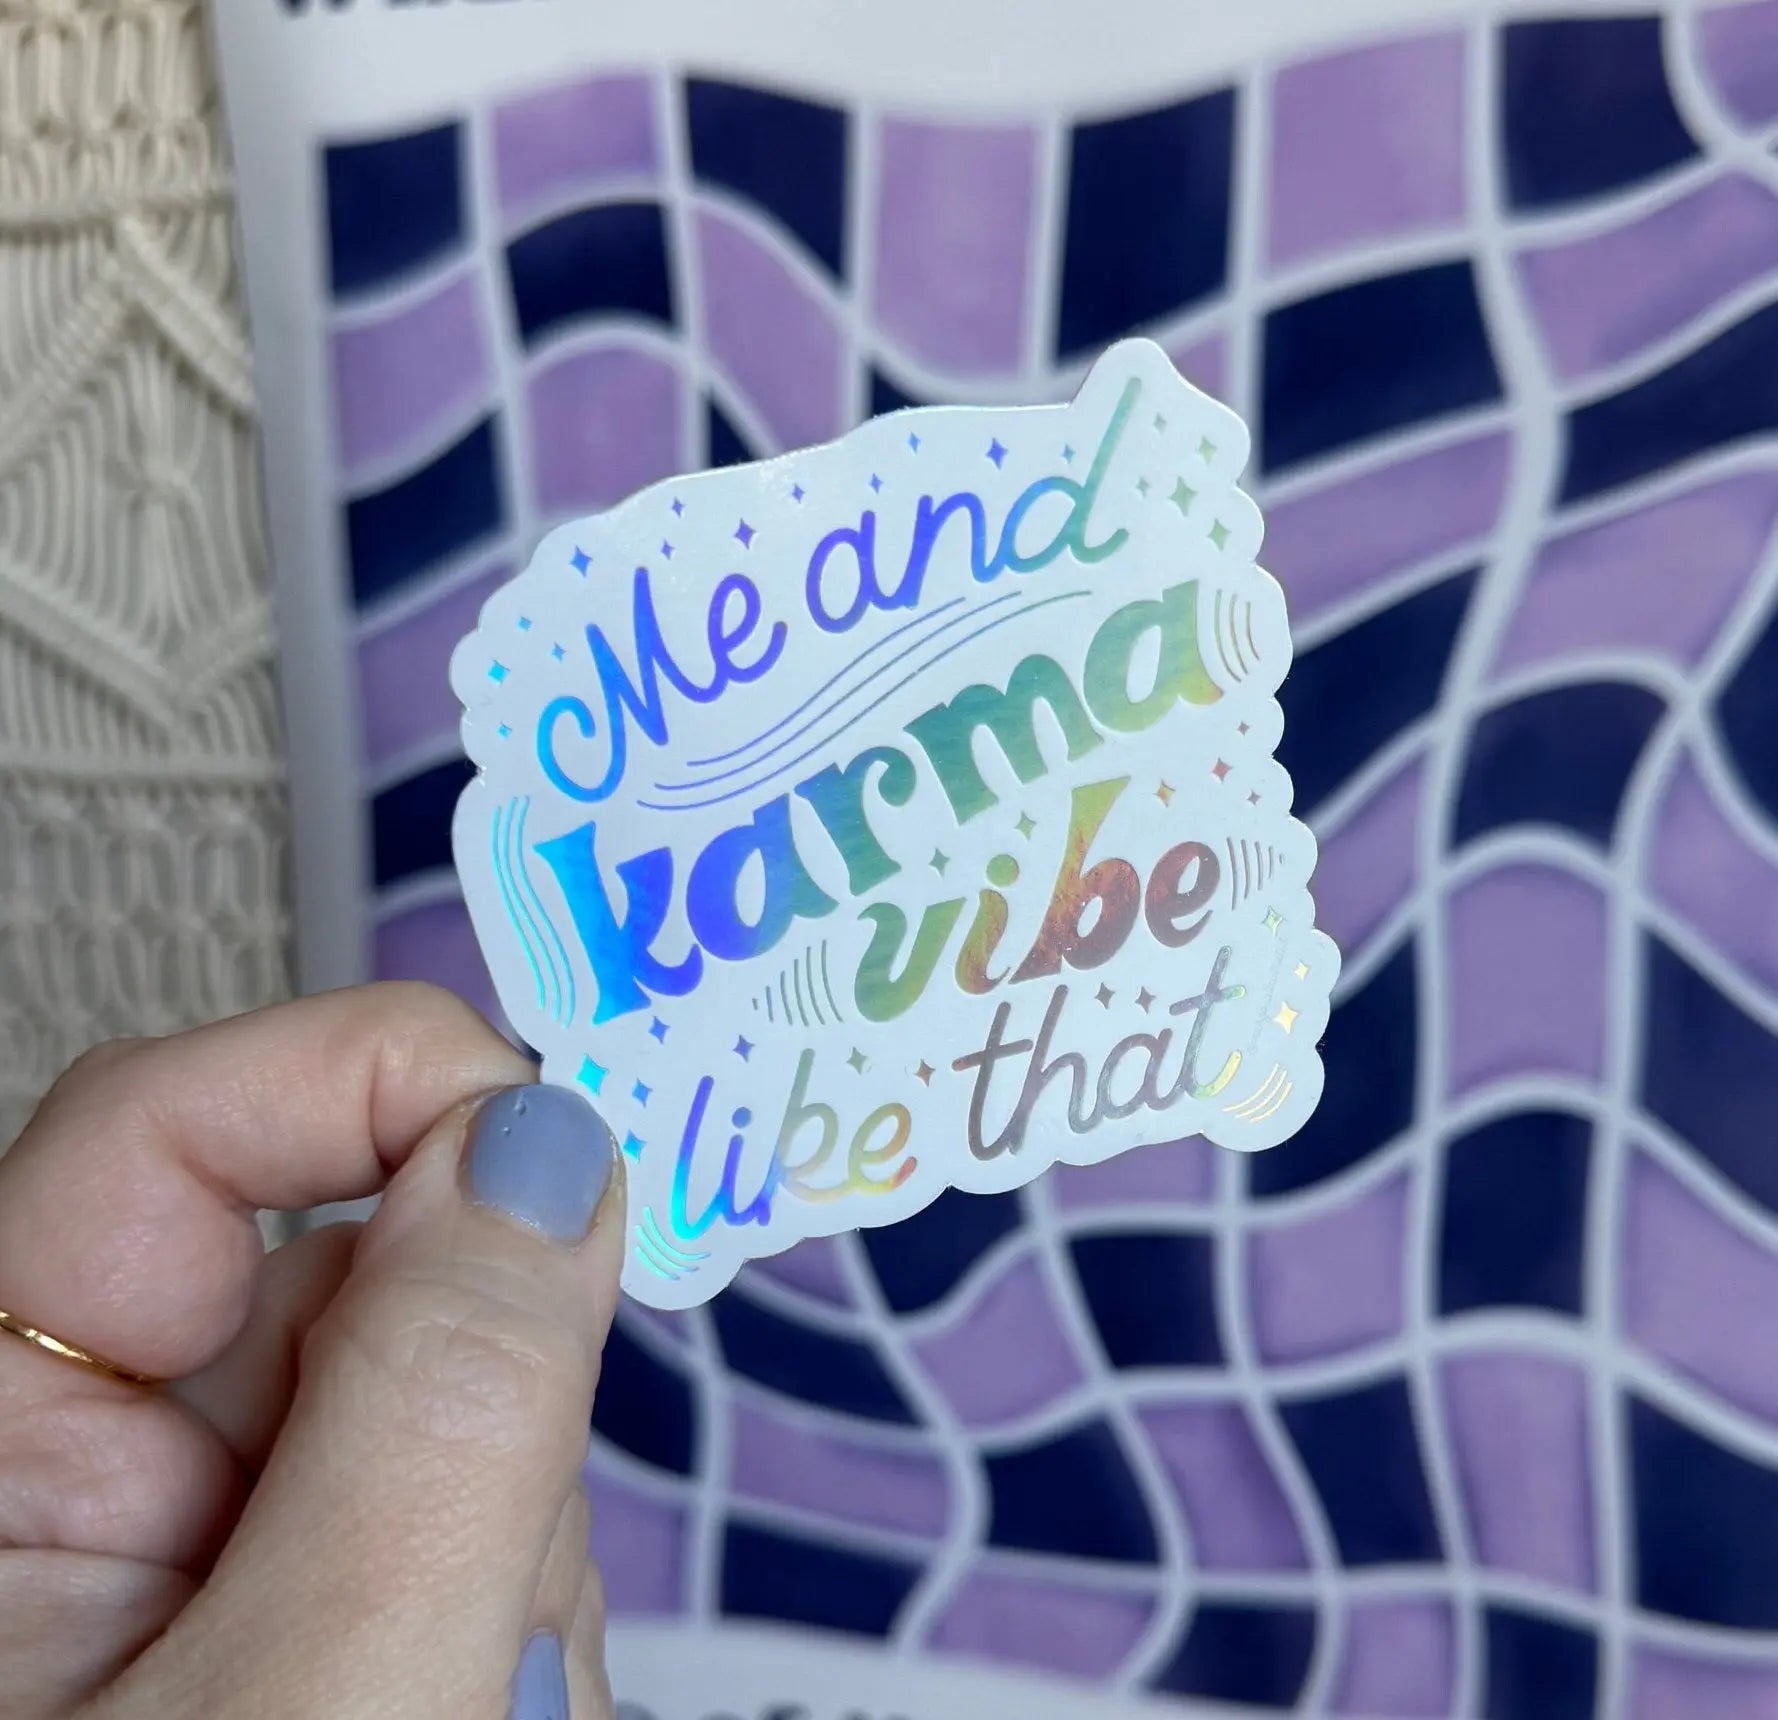 Me and Karma Vibe Like That white holographic sticker MangoIllustrated